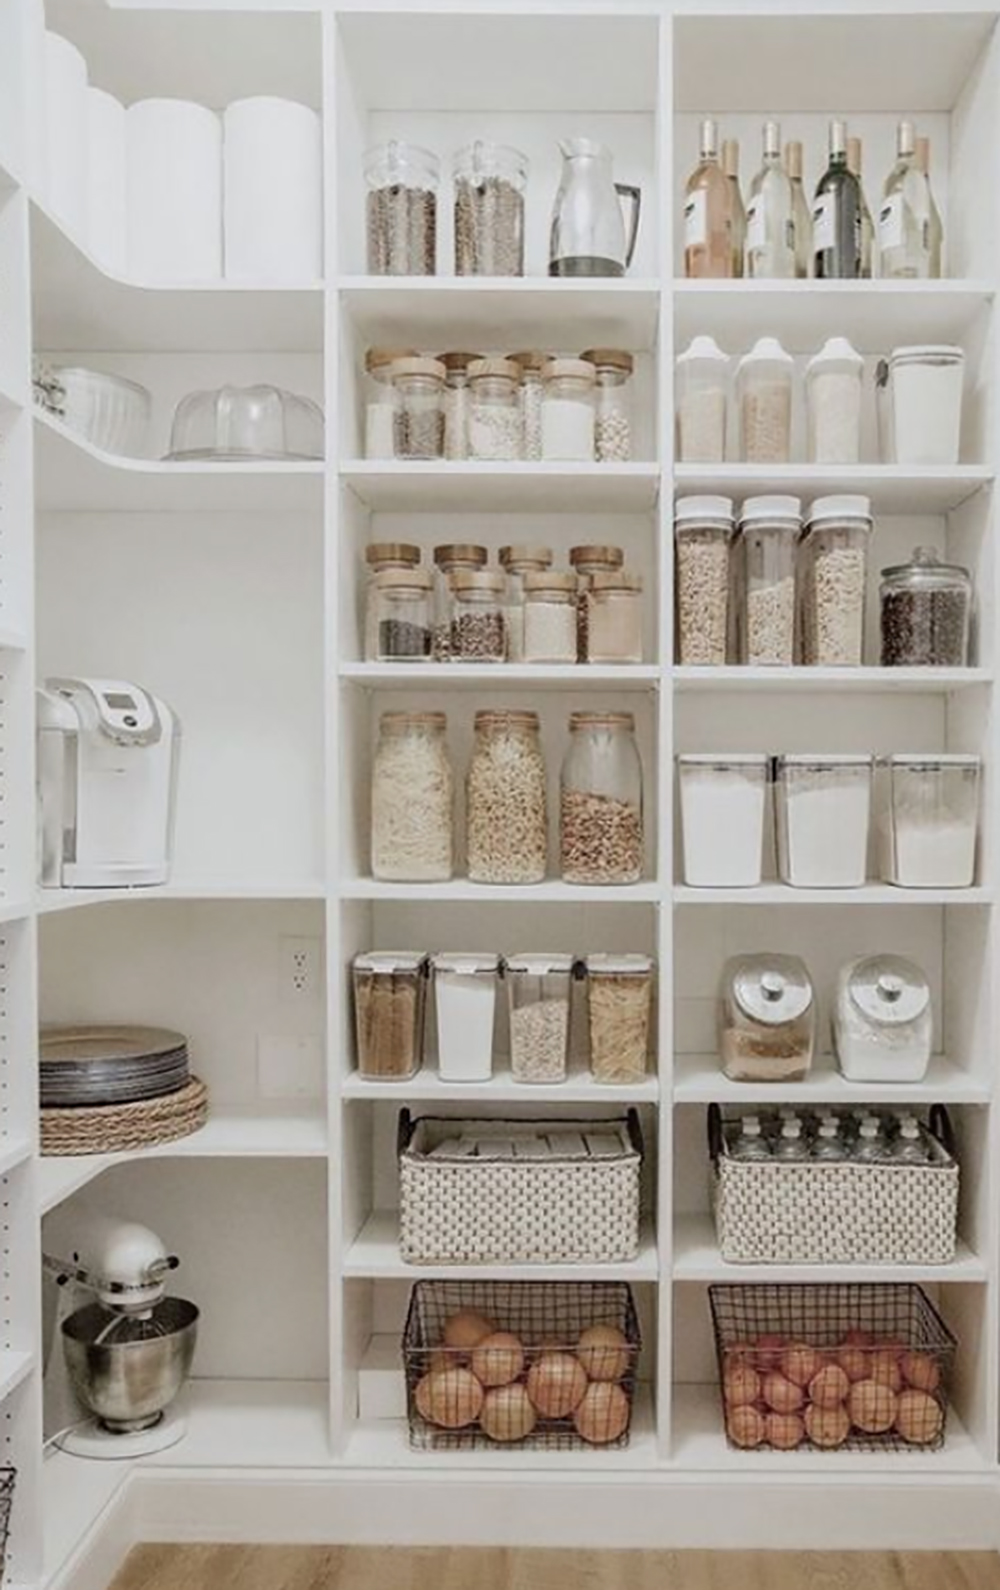 I gathered my absolute favorite pantry design and organization inspiration. Because, as a mother of five and having a large family, the pantry is kind of one of those areas of the house that has to be approached with strategy, you know? Not to mention, a pretty pantry just feels good. Catch it all along with my favorite finds for organizing your pantry on KaraLayne.com!